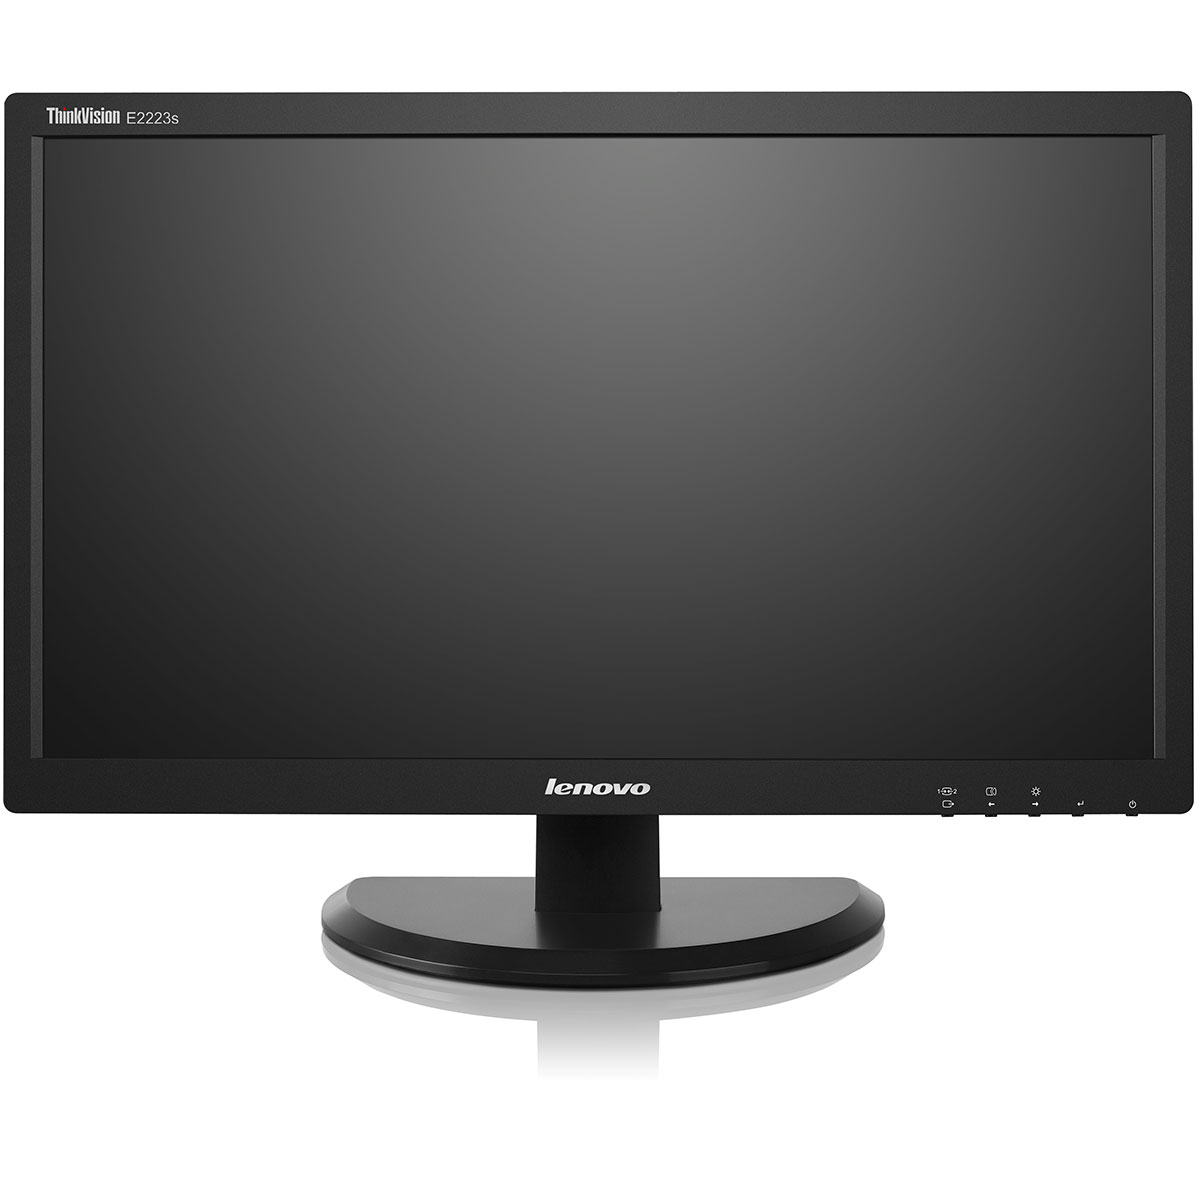 Lenovo ThinkCentre M710s Intel Core i7 7th Gen 8GB RAM 500GB HDD + 2GB  NVIDIA Geforce GT 730 + ThinkVision E2223s 21.5-inch FHD WLED Backlit LCD  Monitor | Mombasa Computers